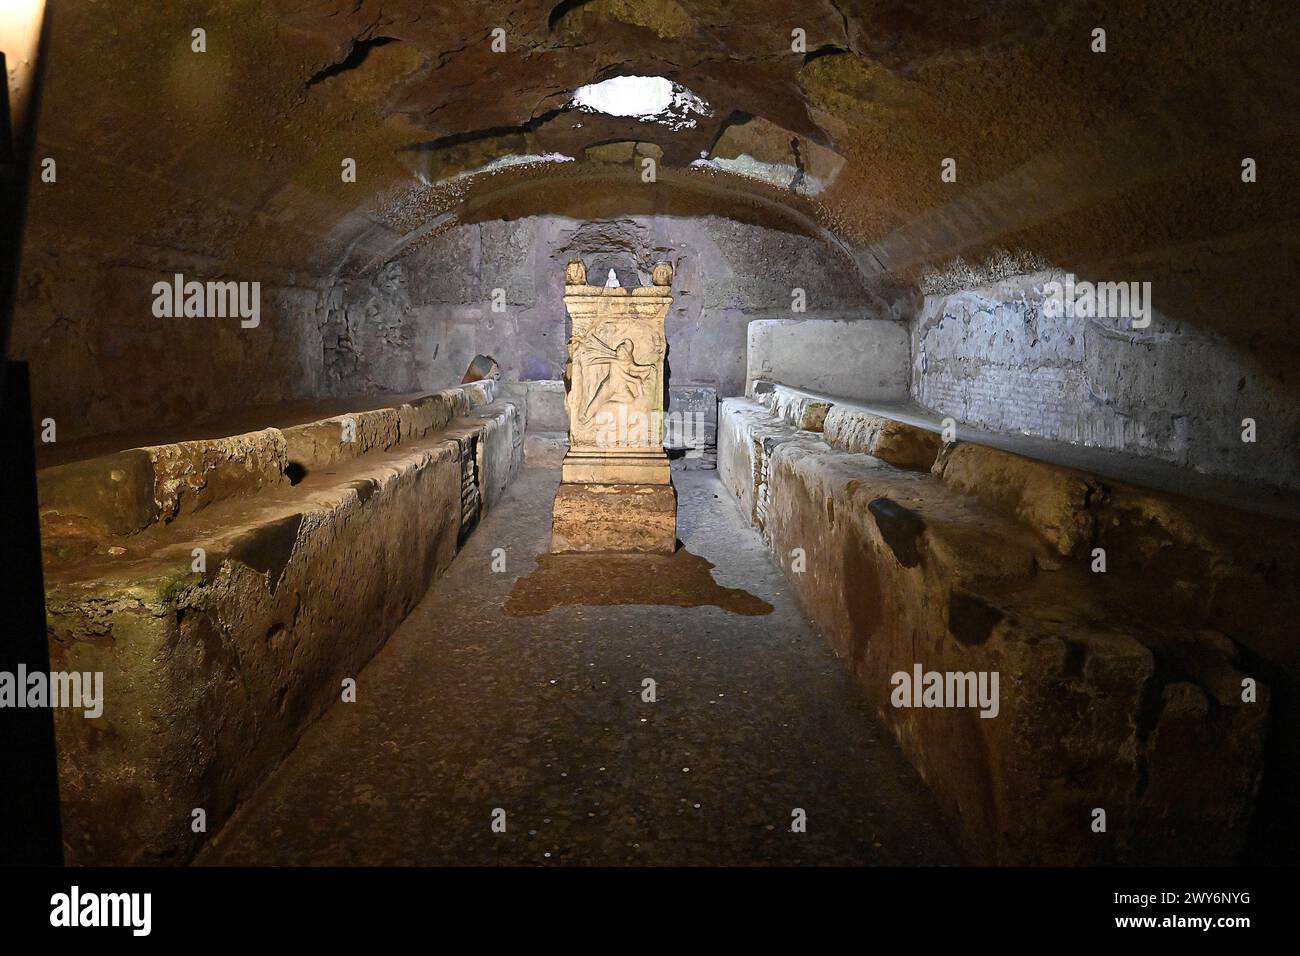 Italy, Rome: interior of the mithraeum (sanctuary of the cult of Mithras), Roman imperial building located several meters below the Basilica of Saint Stock Photo